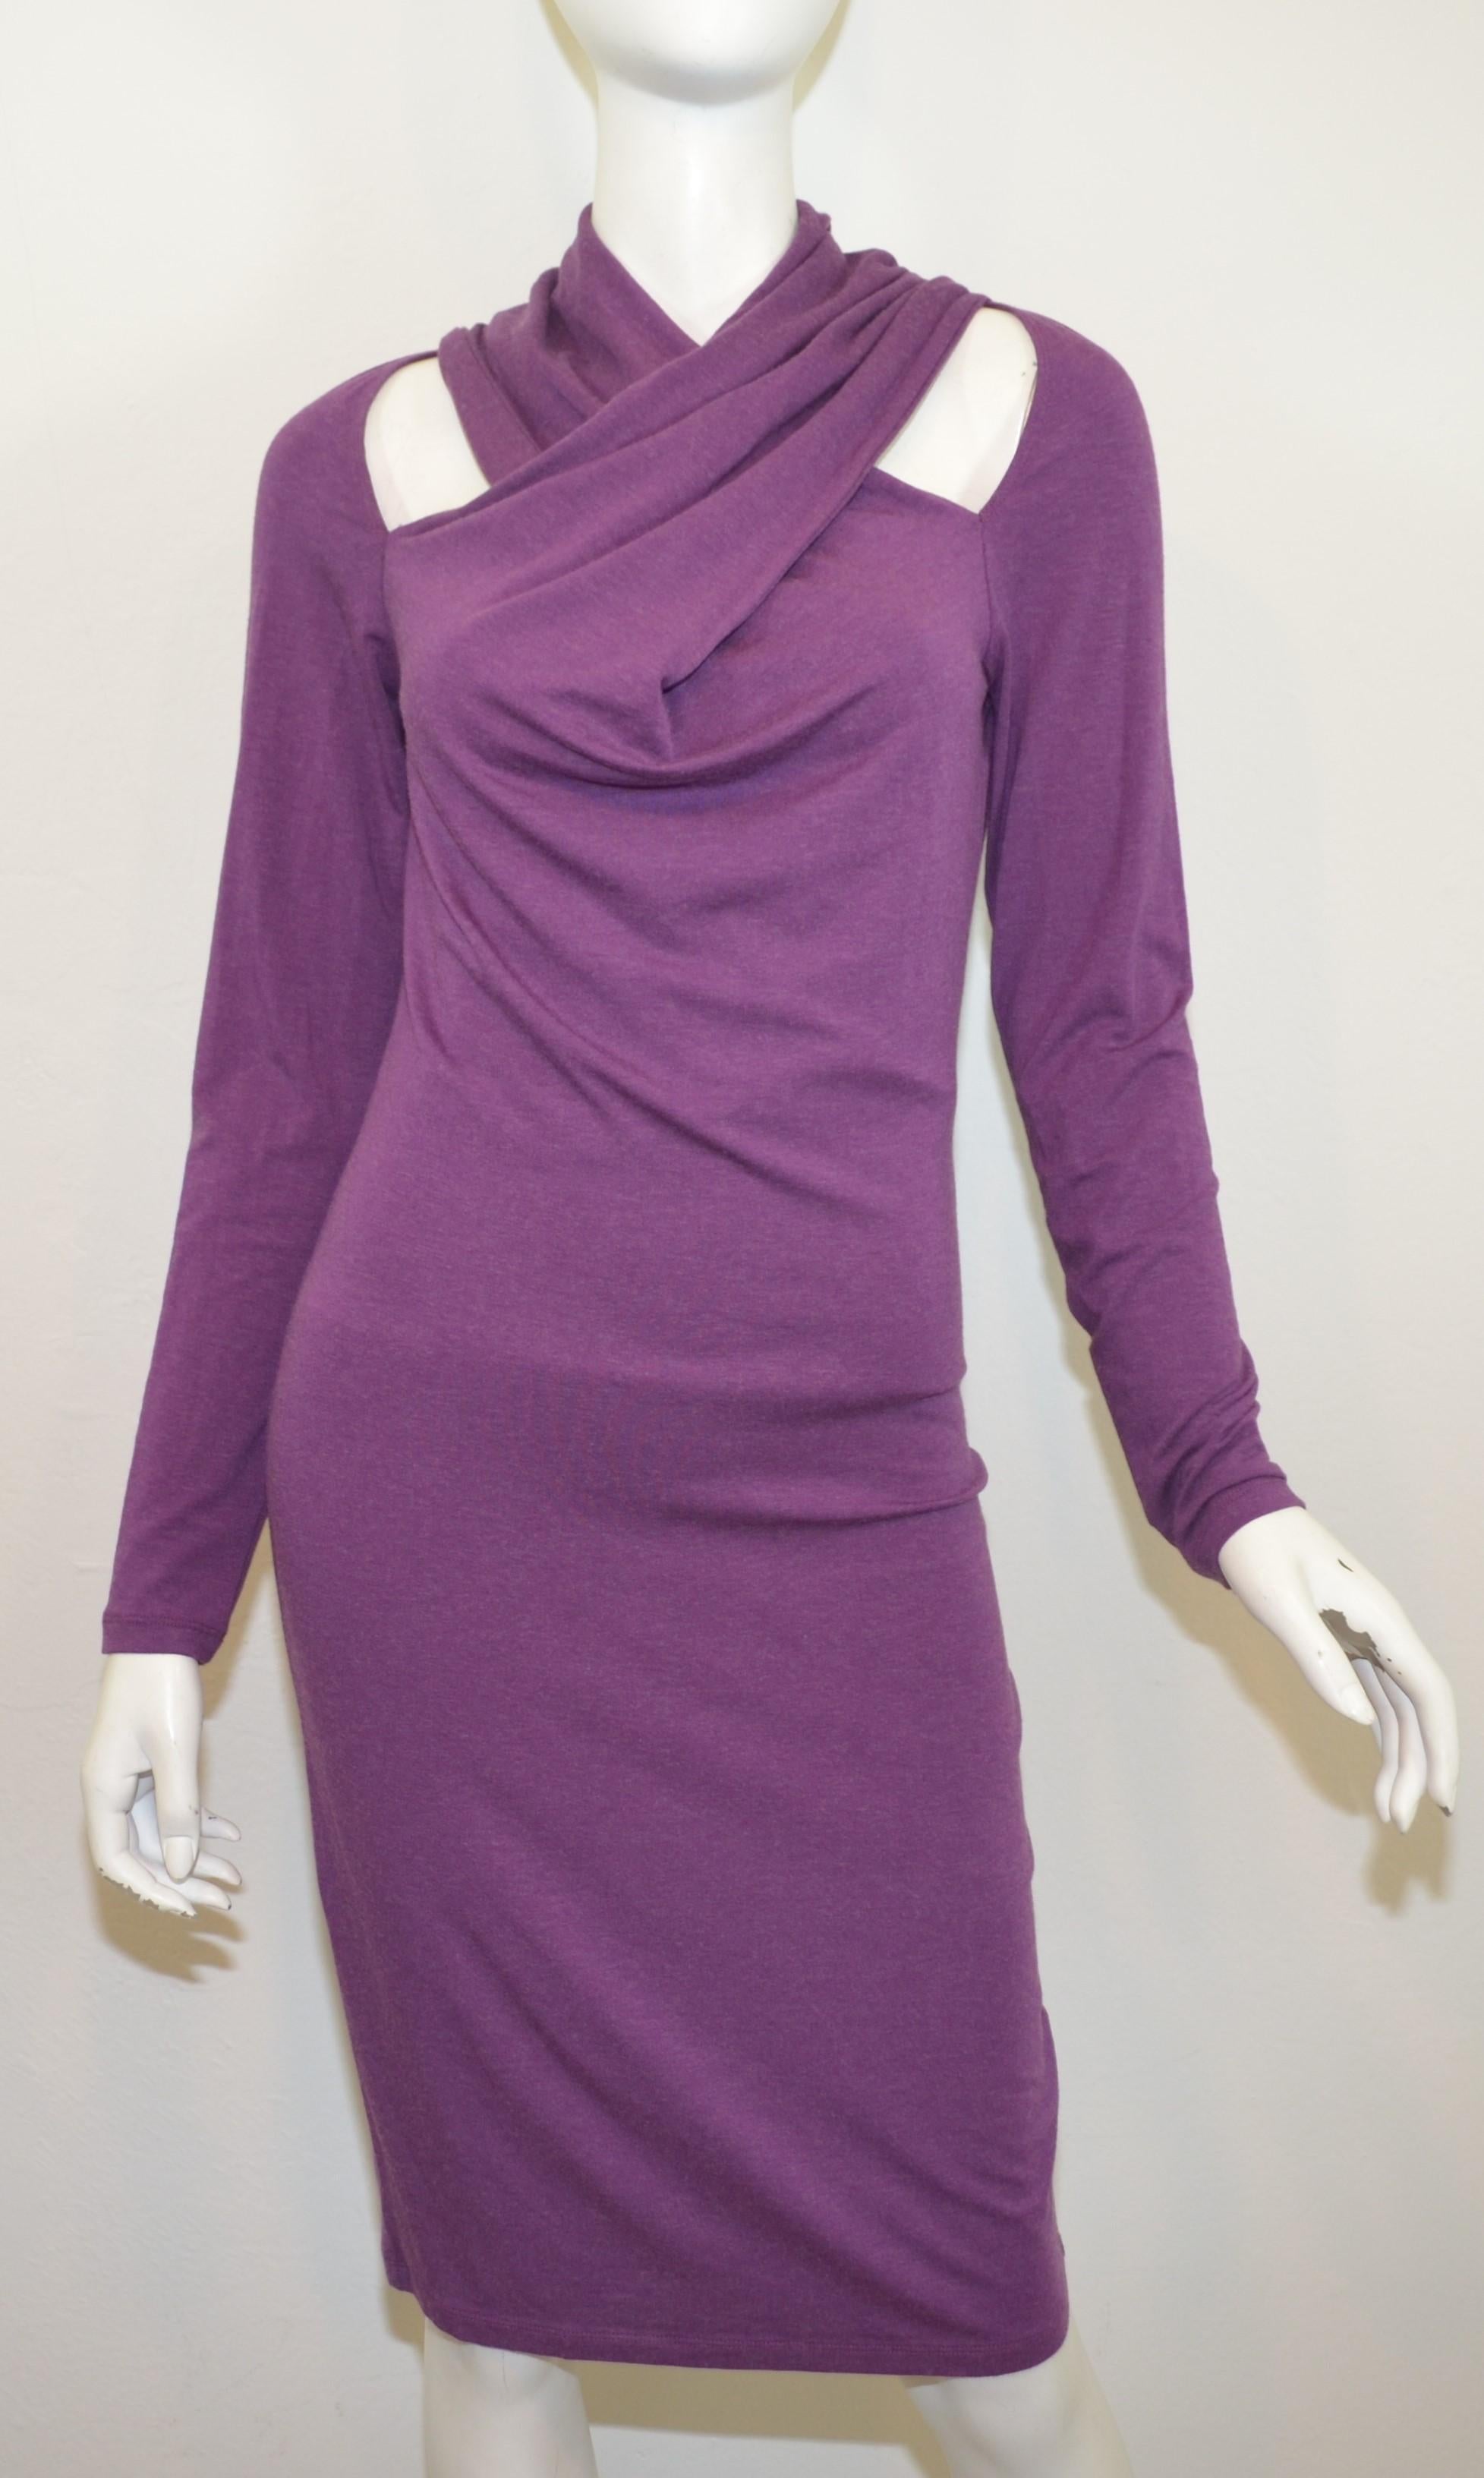 Alexander McQueen Purple Dress with Cut Out Shoulders -- dress features a crossover neckline with cold shoulder cutouts. Dress is new with tags and is labeled a size medium. Made in Italy.

Measurements: (dress has stretch to the fabric)
bust 36''